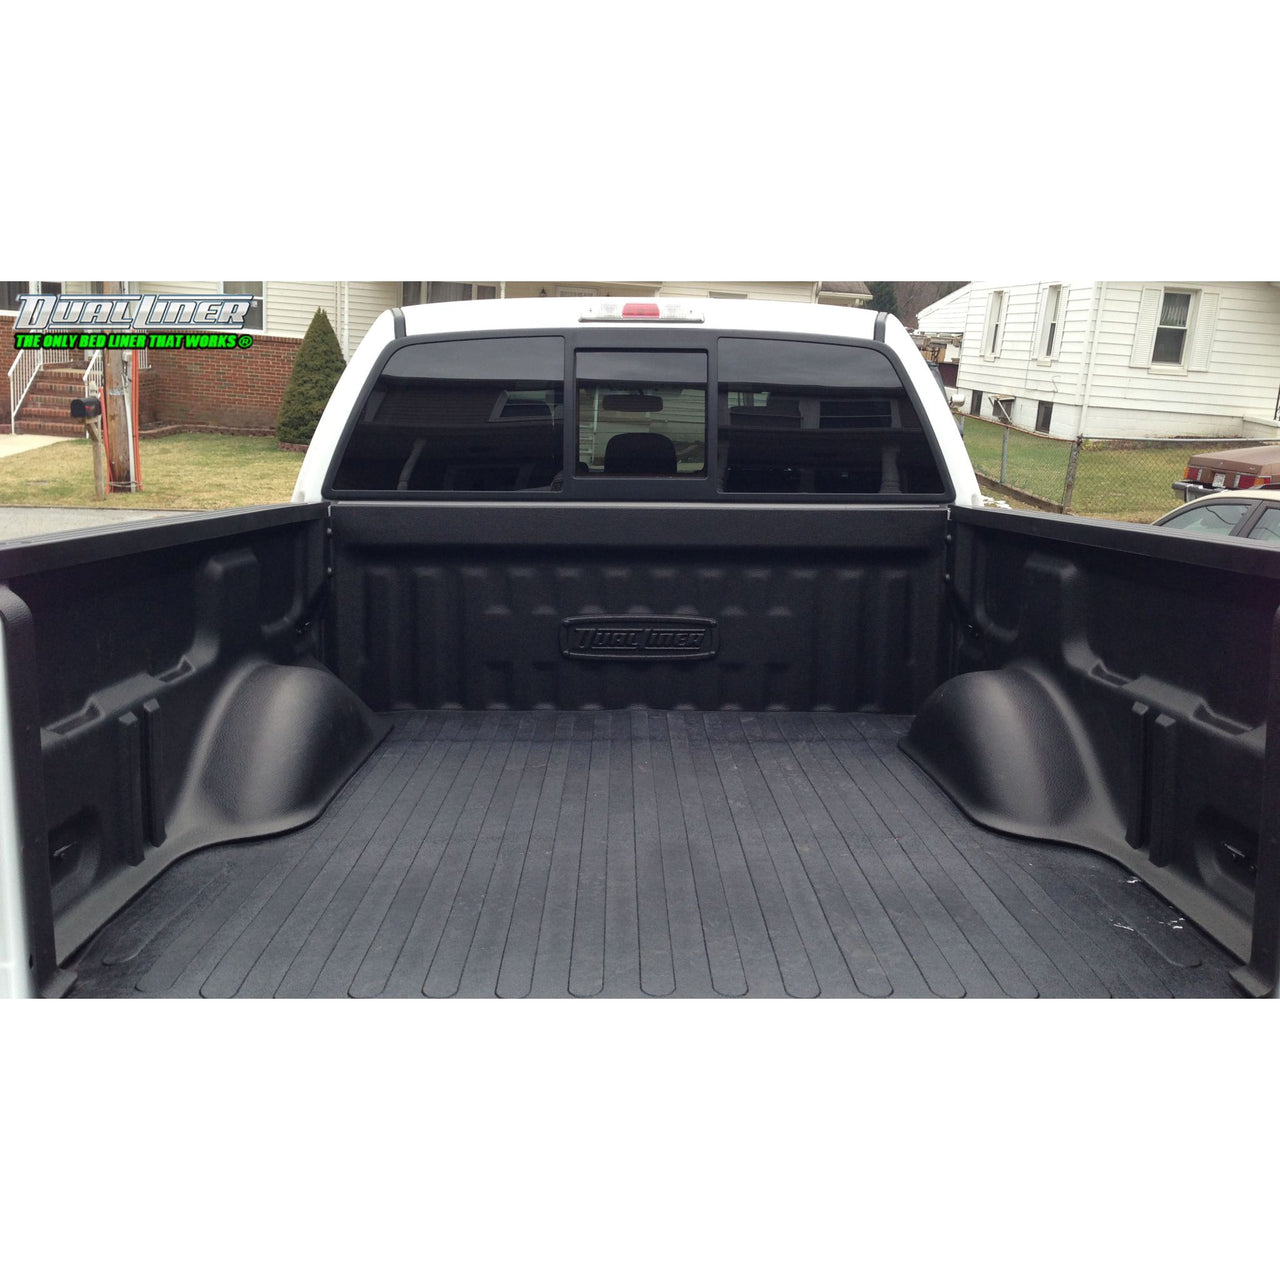 DualLiner 2021 to 2022 F-150 (WITH LED Light Bar) - Regular 6.5' Bed